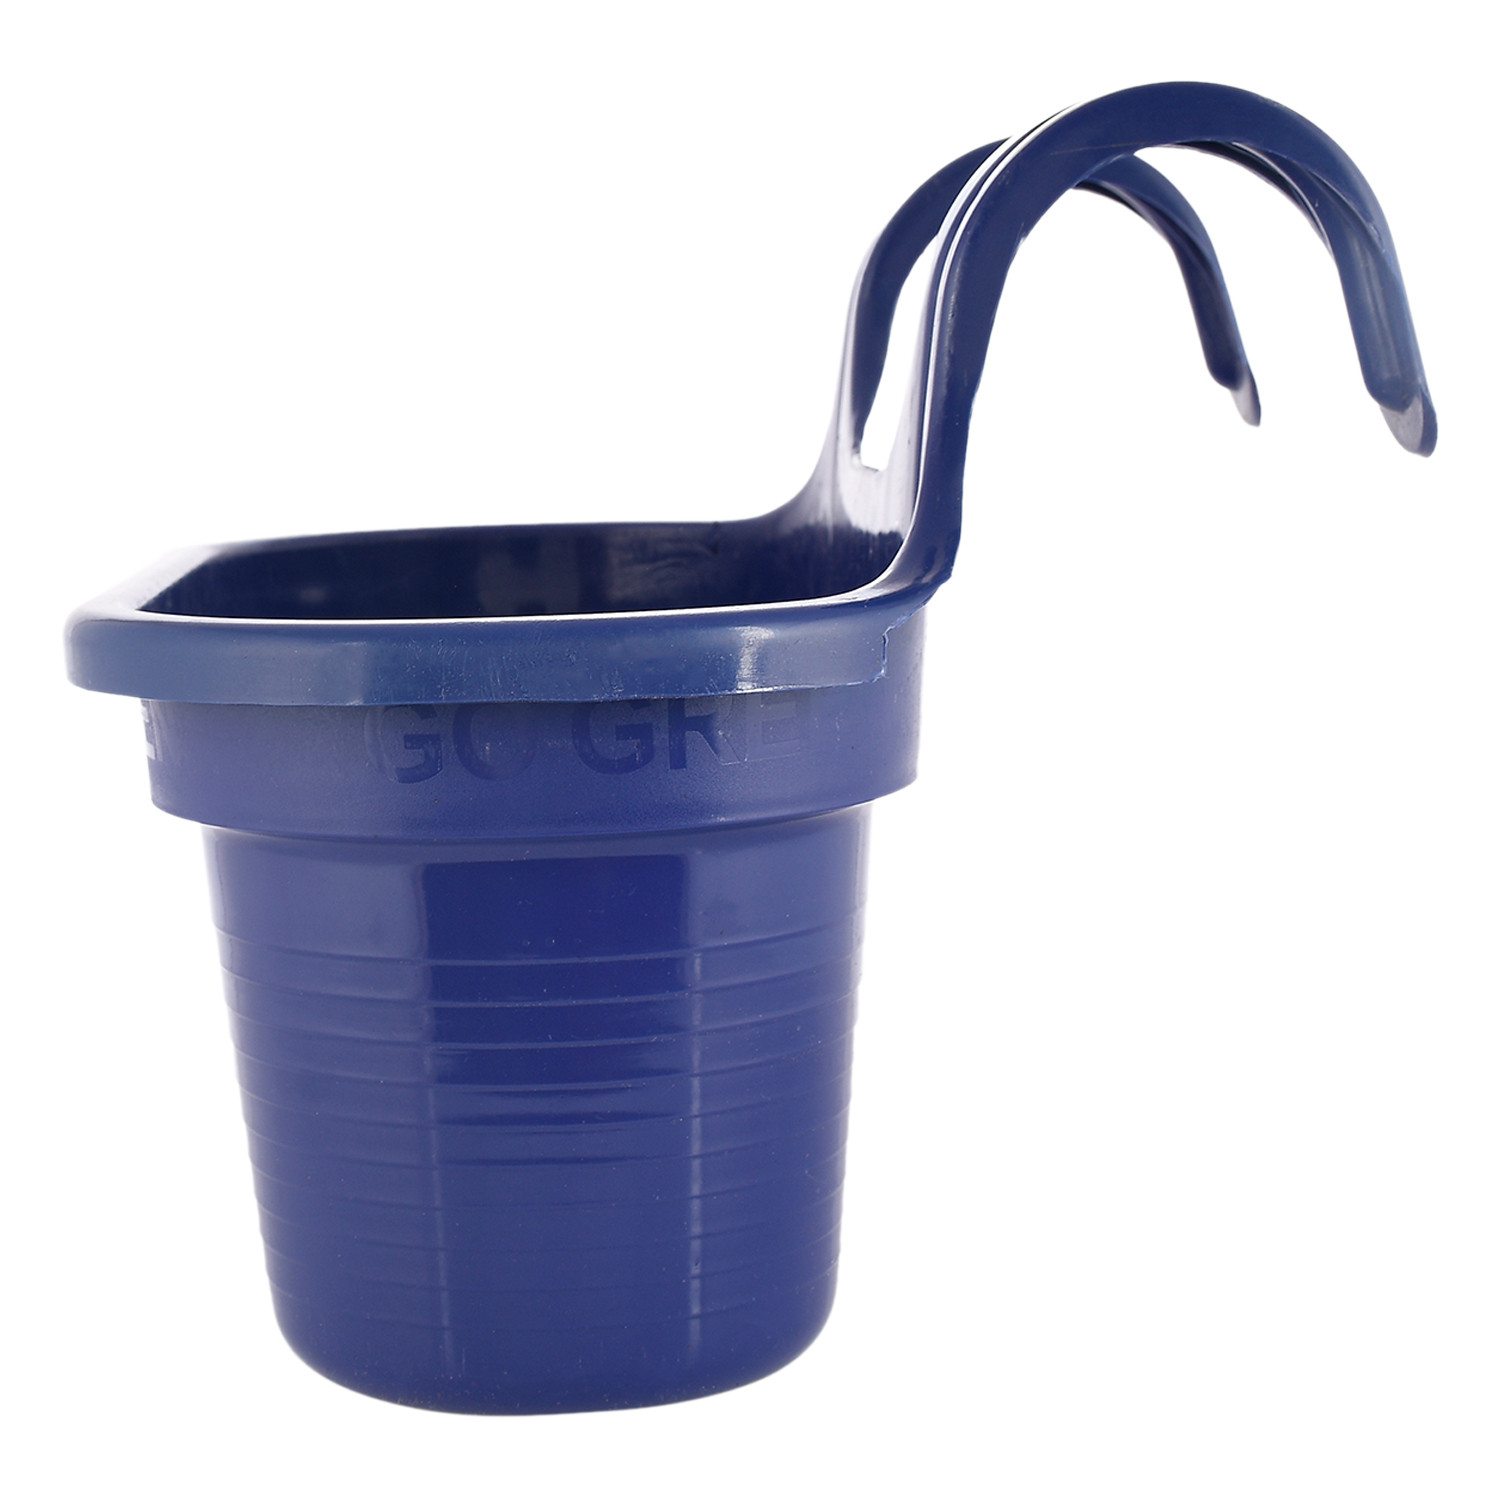 Kuber Industries Hanging Flower Pot|Double Hook Plant Container|Durable Plastic Glossy Finish Pots for Home|Balcony|Garden|12 Inch (Blue)